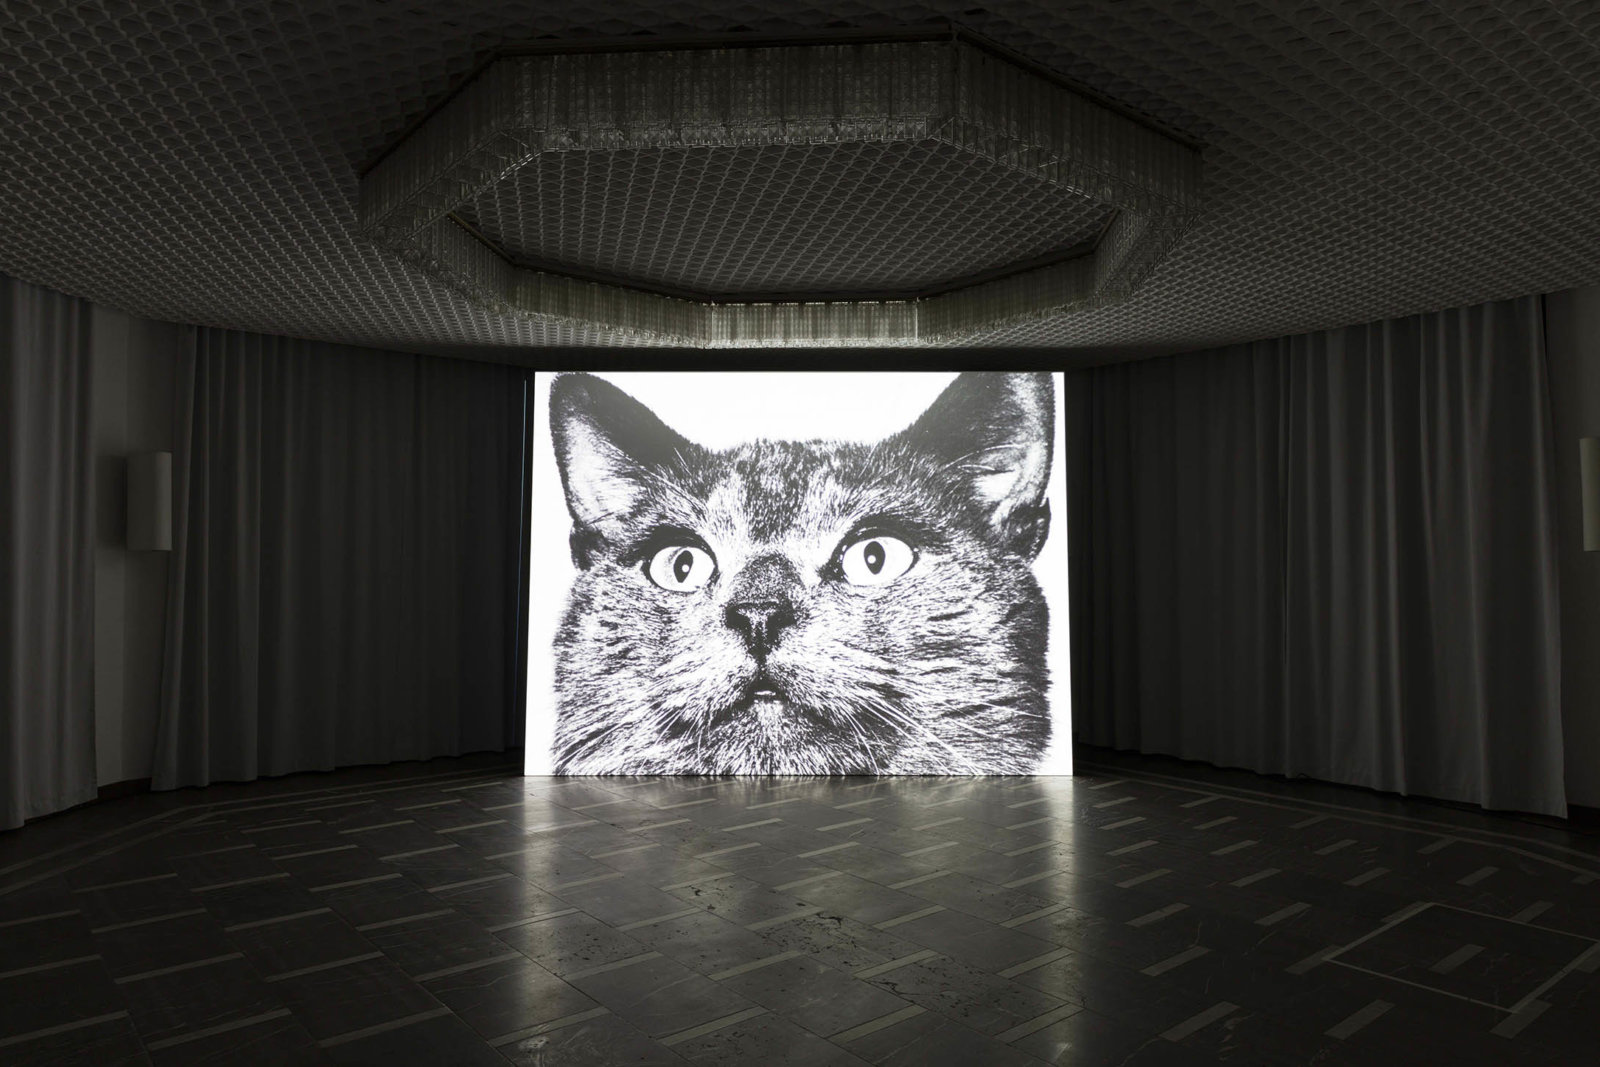 Geoffrey Farmer, Look in my face; my name is Might-have-been; I am also called No-more, Too-late, Farewell, 2010–2014, computer-generated algorithmic montage sequence, dimensions variable. Installation view, The Care With Which The Rain Is Wrong, Schinkel Pavillon, Berlin, Germany, 2017